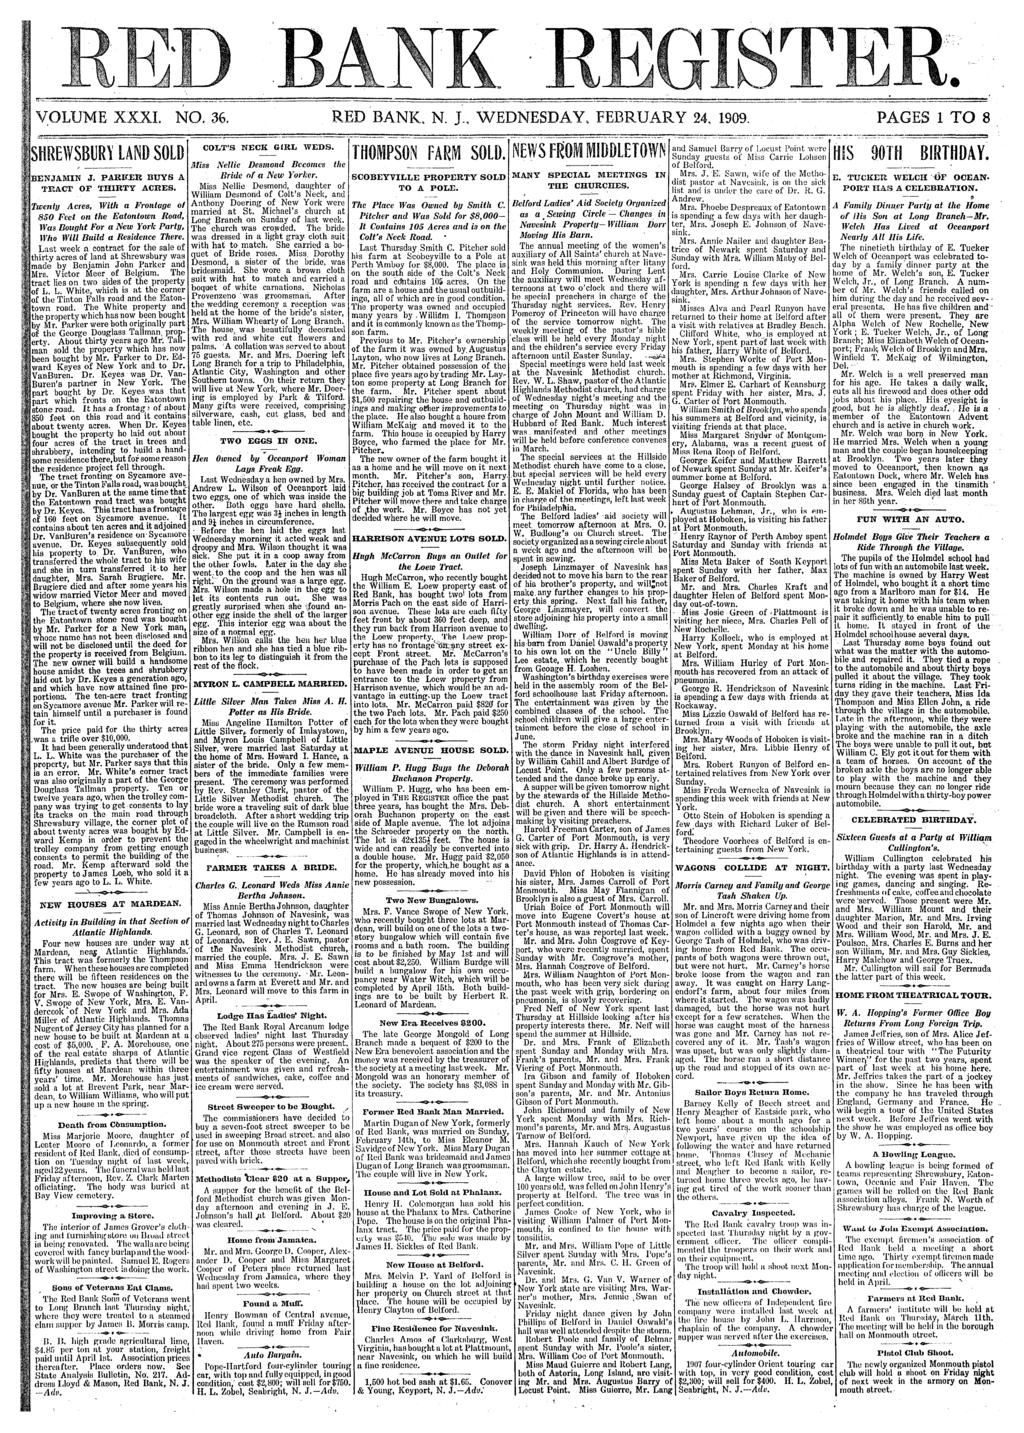 VOLUME XXX. NO..36. RED BANK, N. J., WEDNESDAY, FEBRUARY 24, 1909. PAGES 1 O 8 SHREWSBURY LAND SOLD BENJAMN J. PARKER BUYS A RAC OF HRY ACRES.